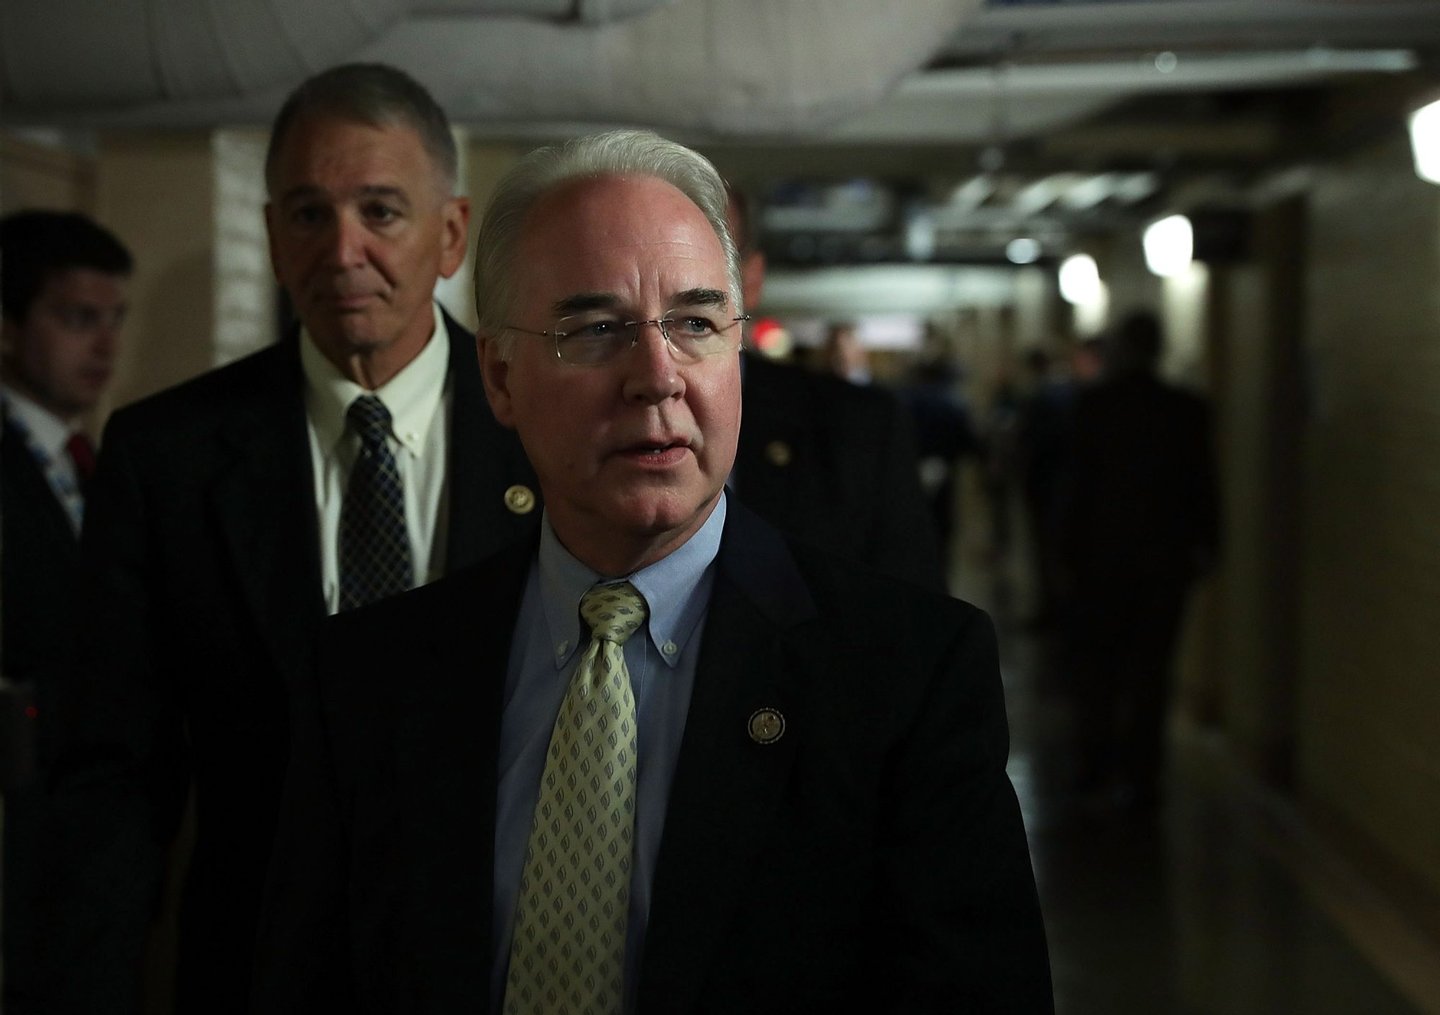 WASHINGTON, DC - JUNE 22: U.S. Tom Price (R-GA) (R) arrives at a House Republican Conference meeting June 22, 2016 at the Capitol in Washington, DC. House GOPs held a conference meeting to discuss the current situation of a gun control sit-in protest on the House floor staged by House Democrat. (Photo by Alex Wong/Getty Images)